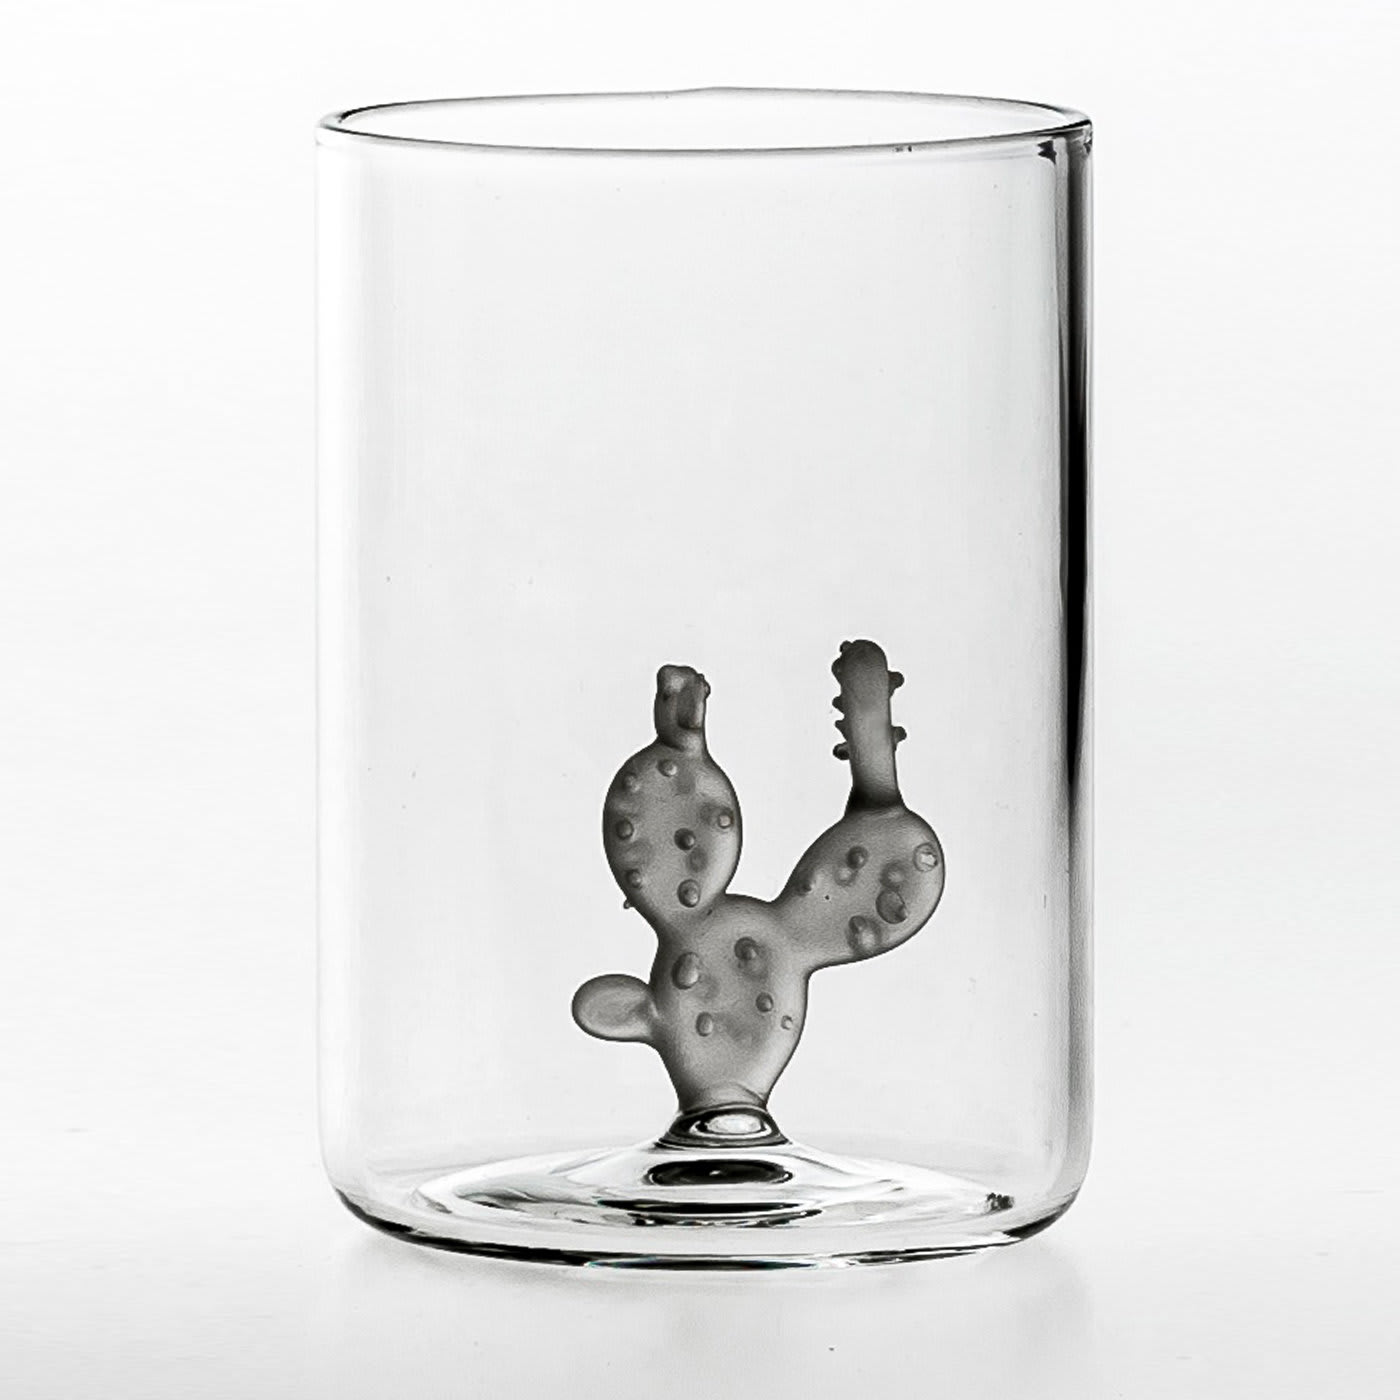 Set of 4 Glasses and 1 Jug Cactus Collection - Casarialto